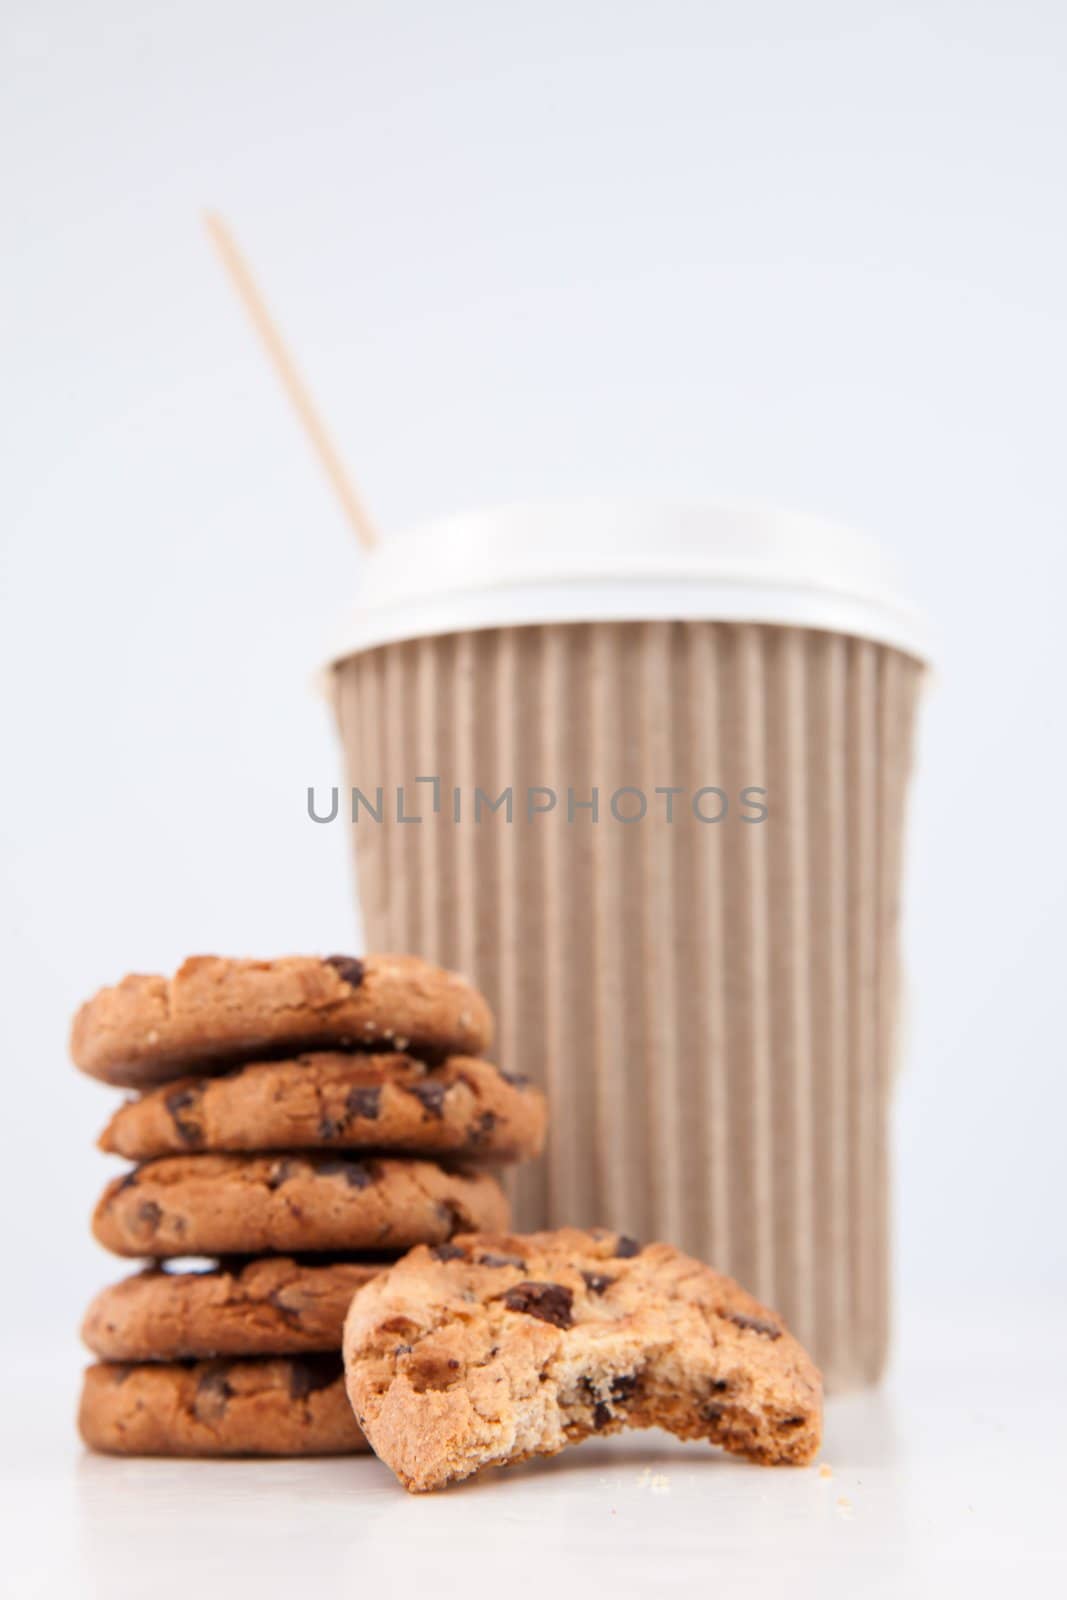 Five cookies and an half eaten cookie and a cup of coffee placed by Wavebreakmedia